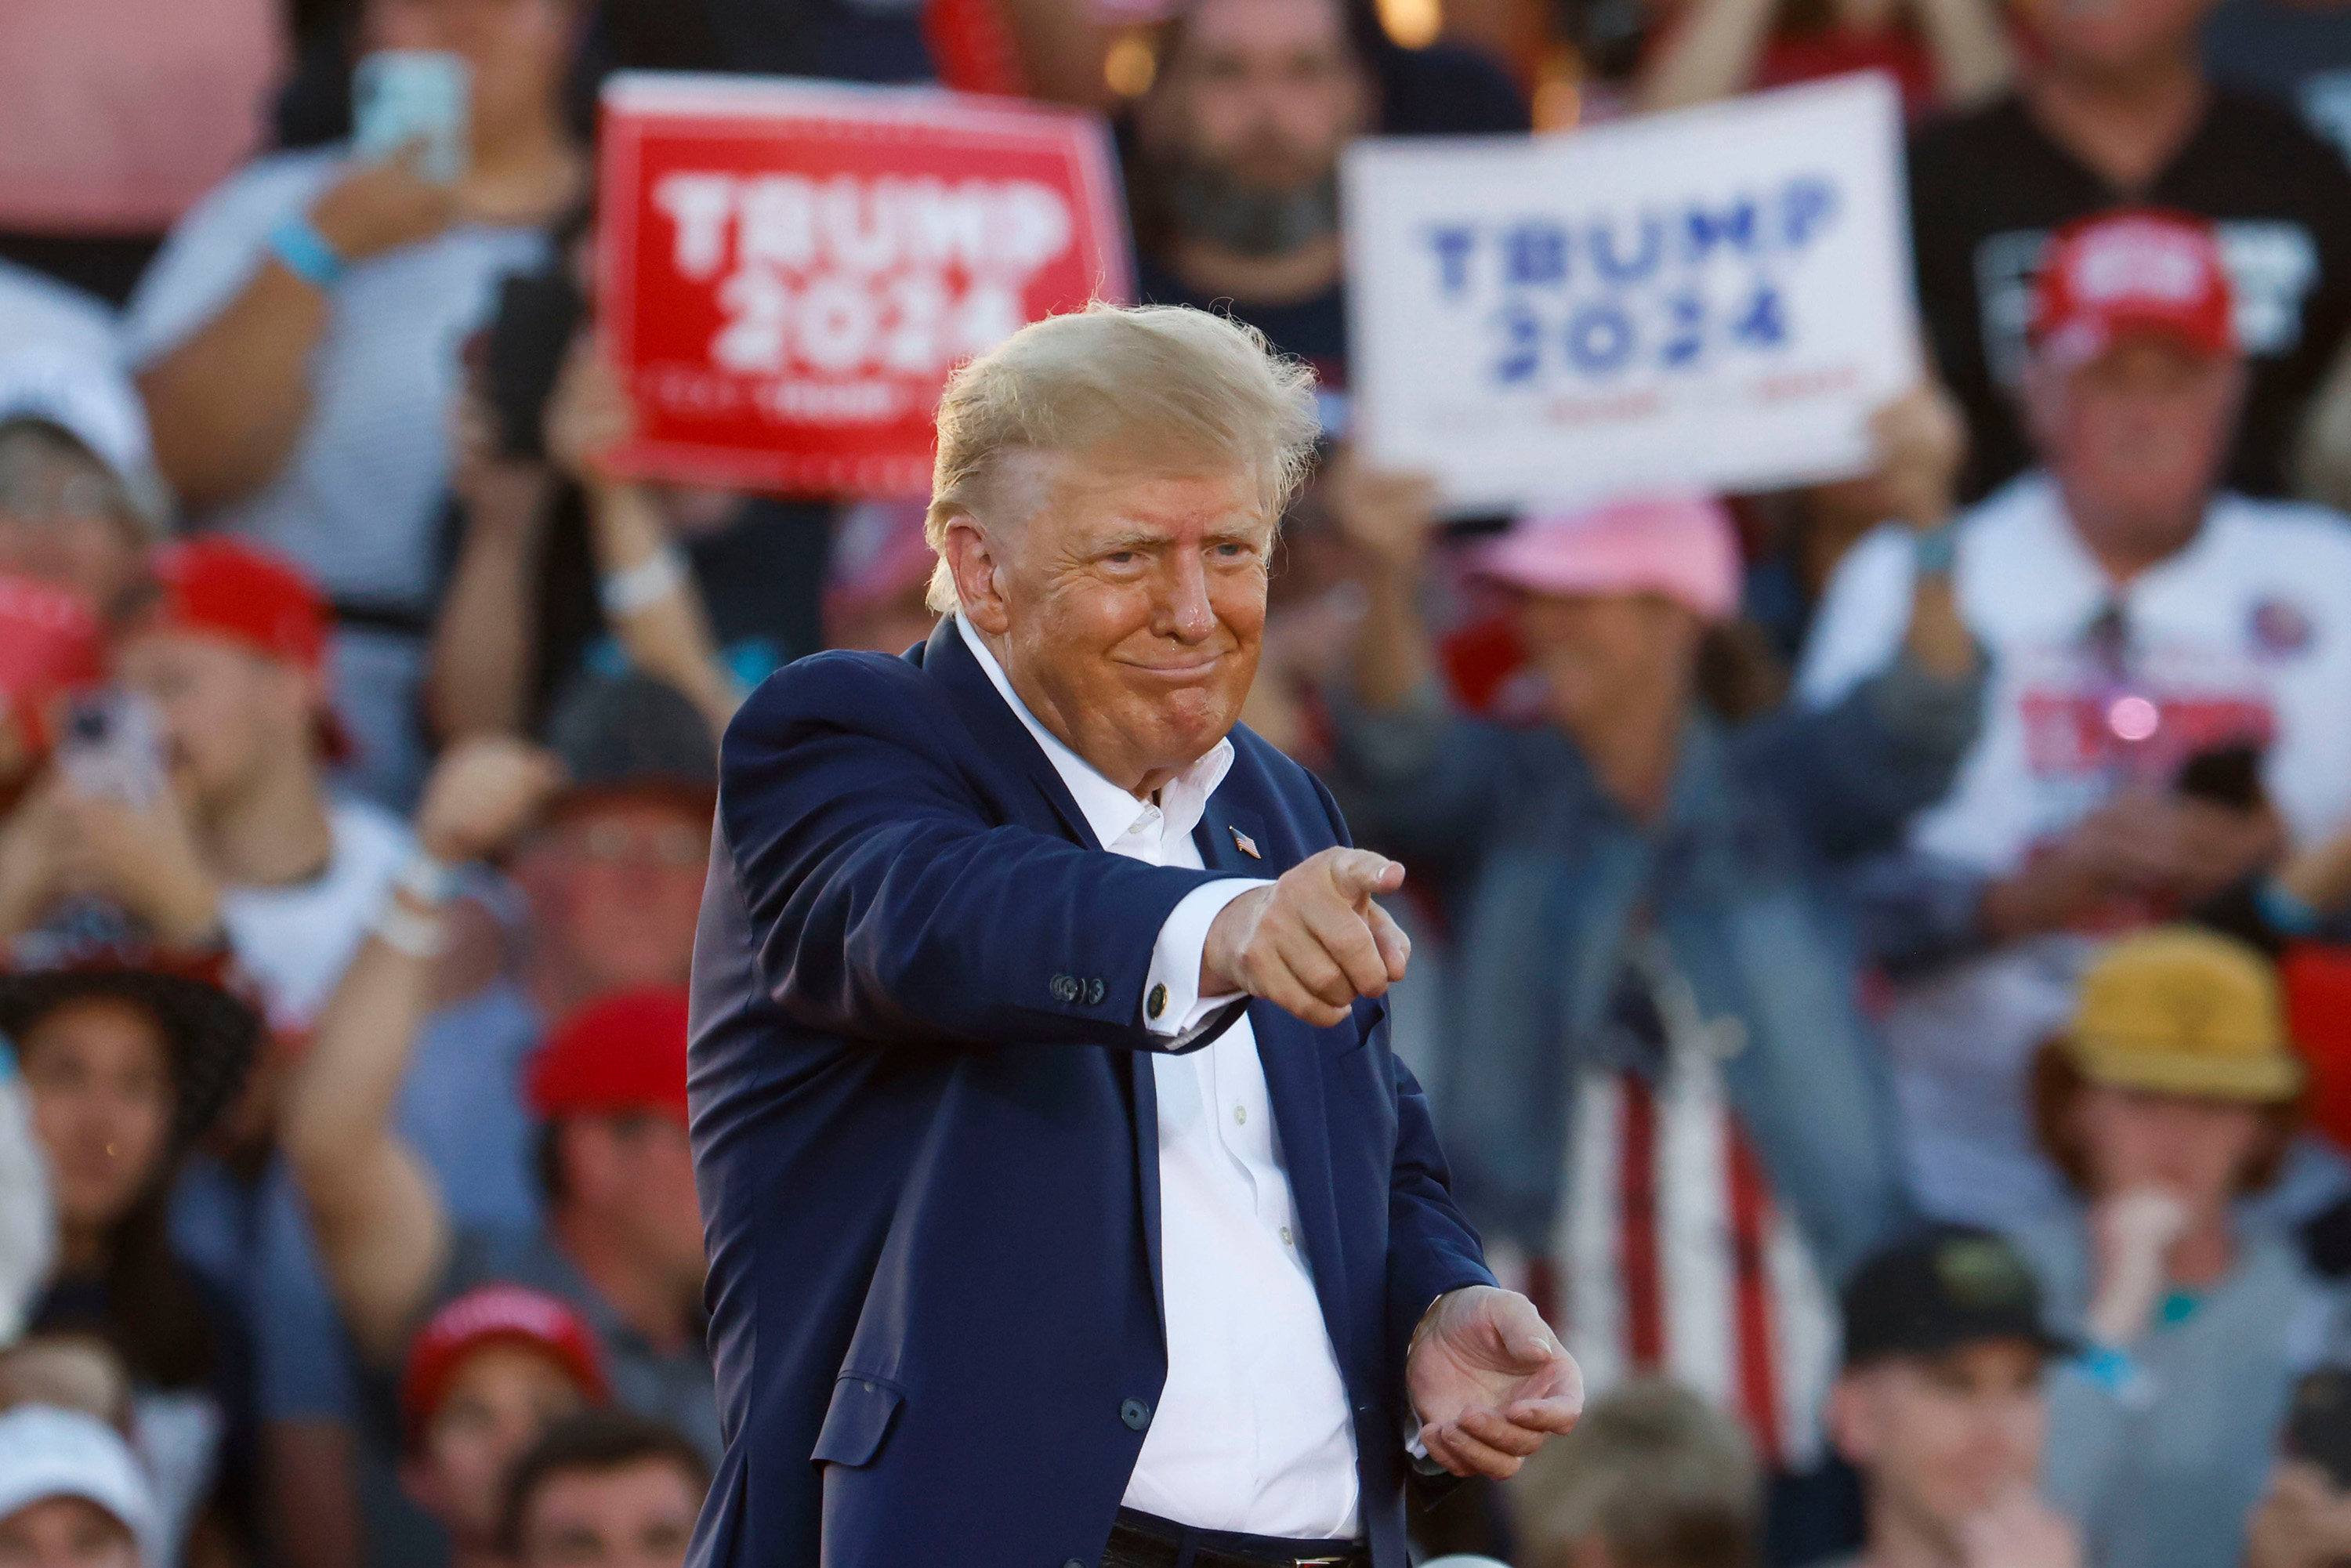 Former US president Donald Trump points into the crowd during a campaign rally in Waco, Texas, in March 2023. Photo: TNS